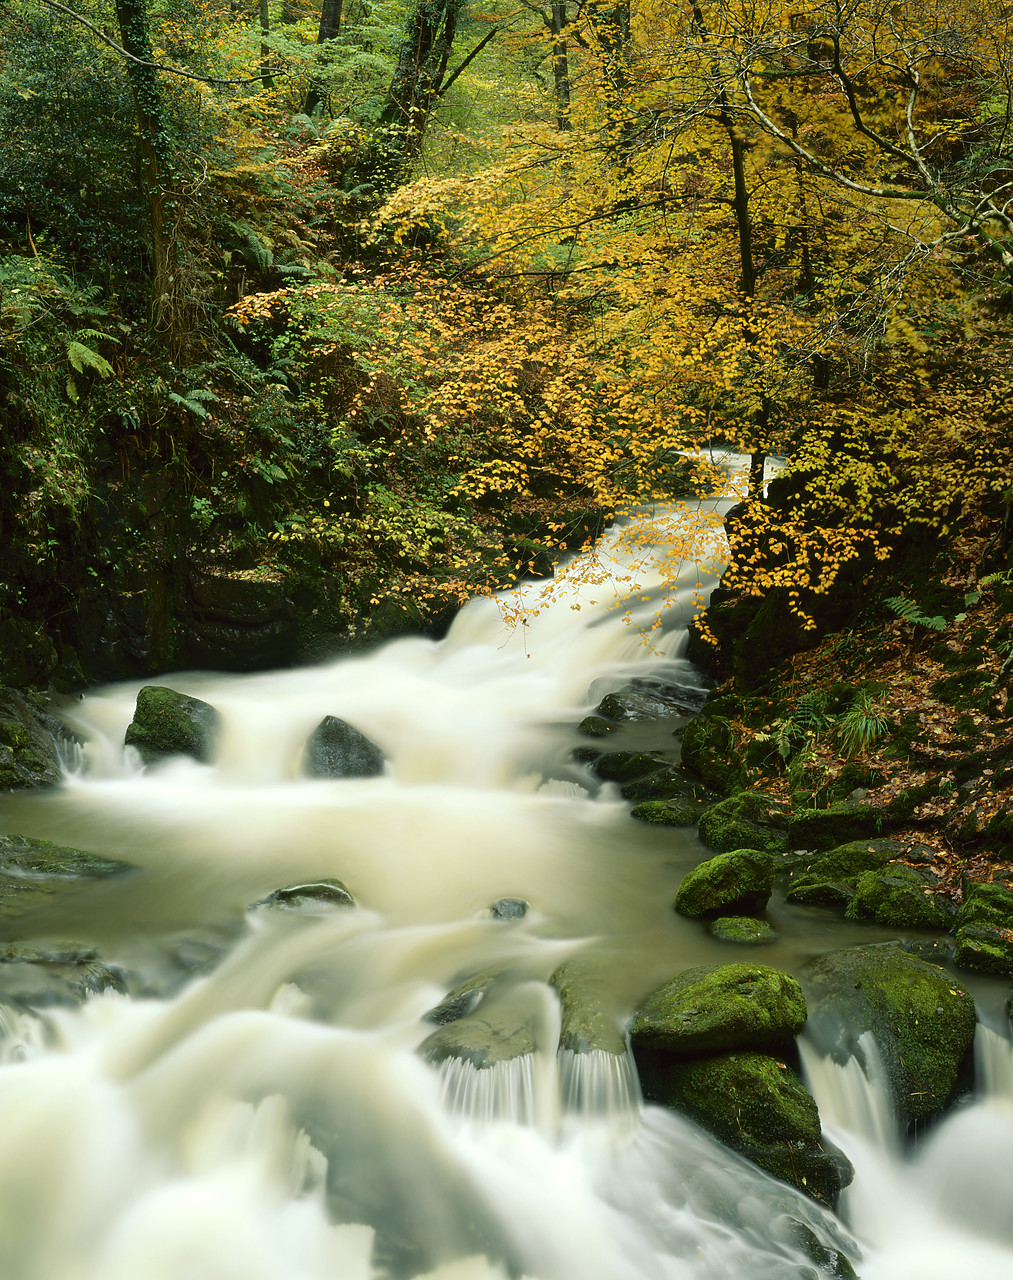 #924131-2 - River Stock in Autumn, Ambleside, Lake District National Park, Cumbria, England